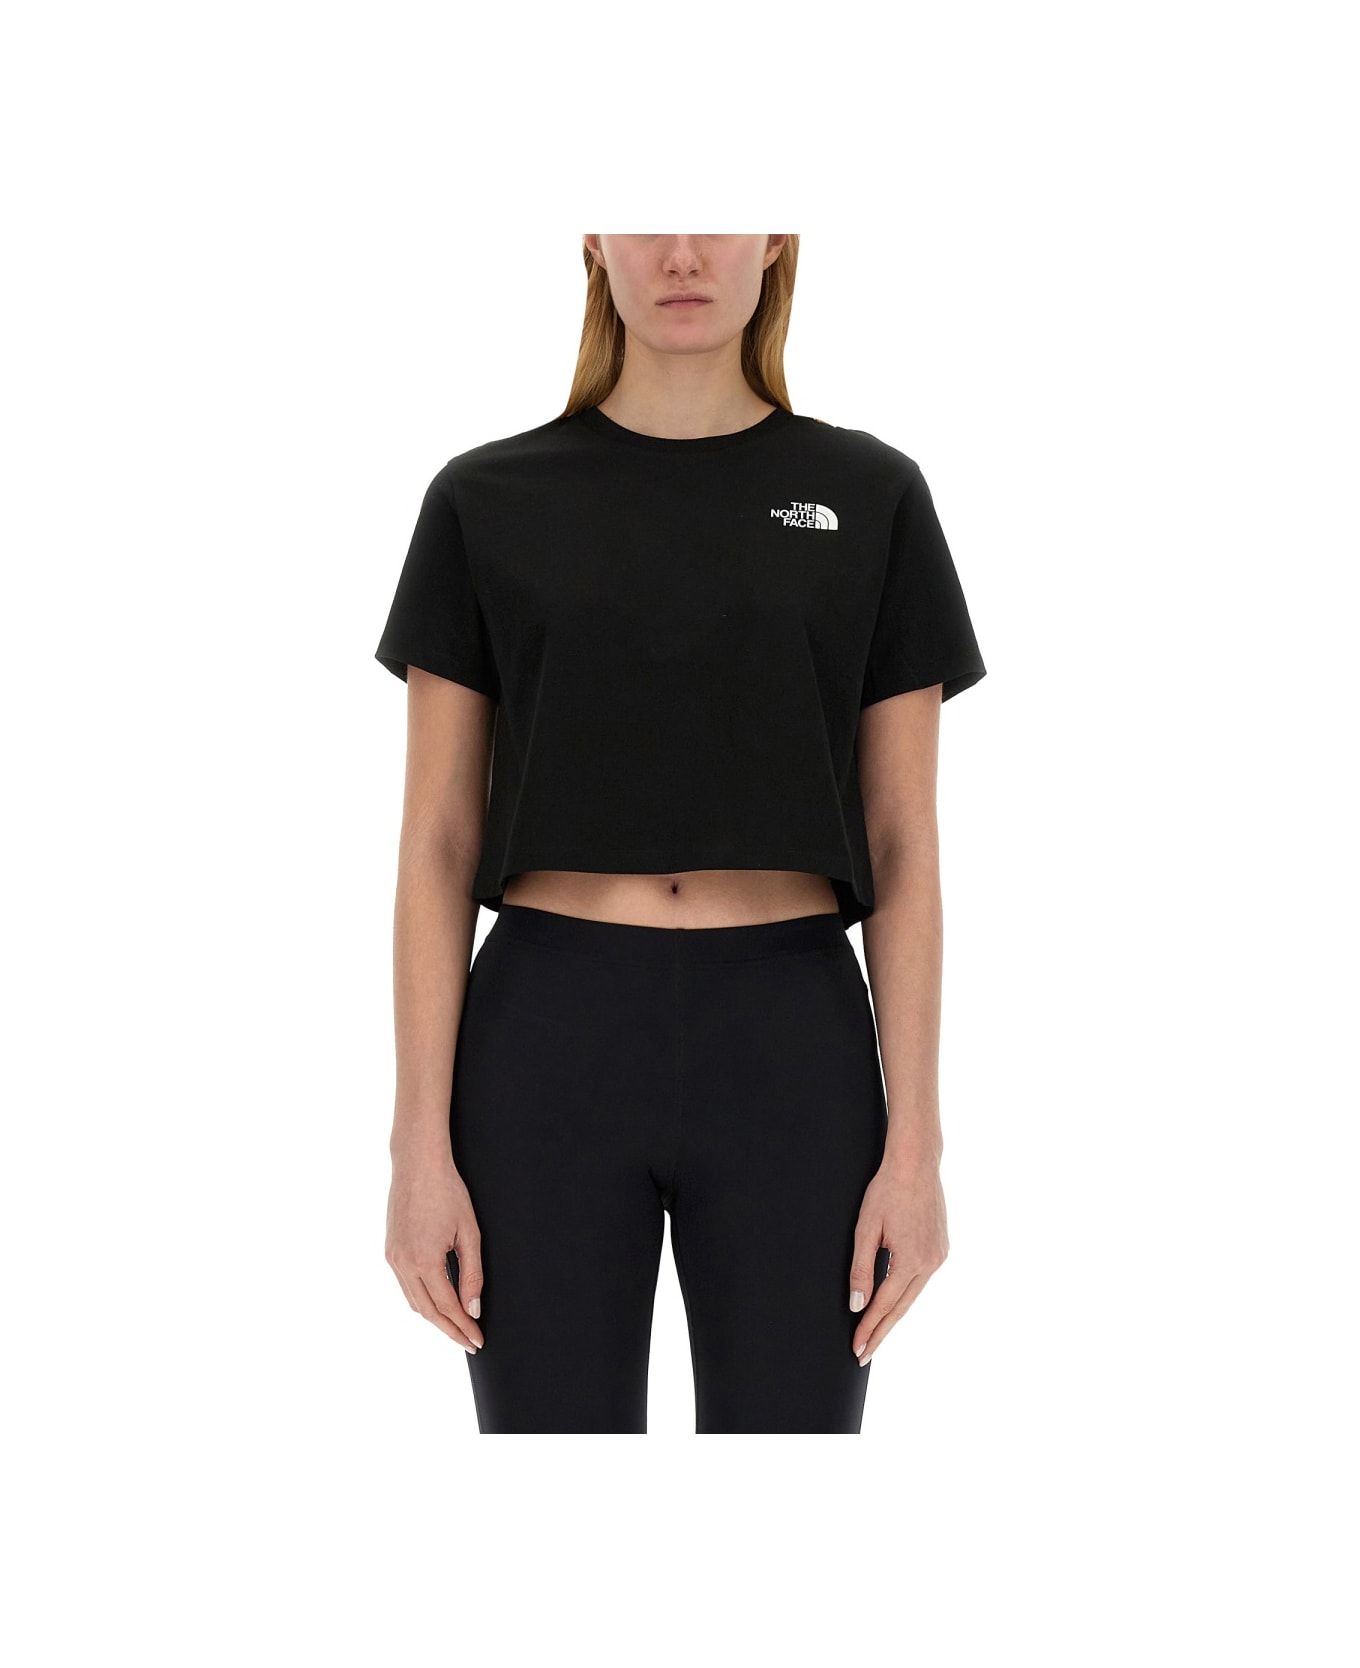 The North Face T-shirt With Logo - BLACK